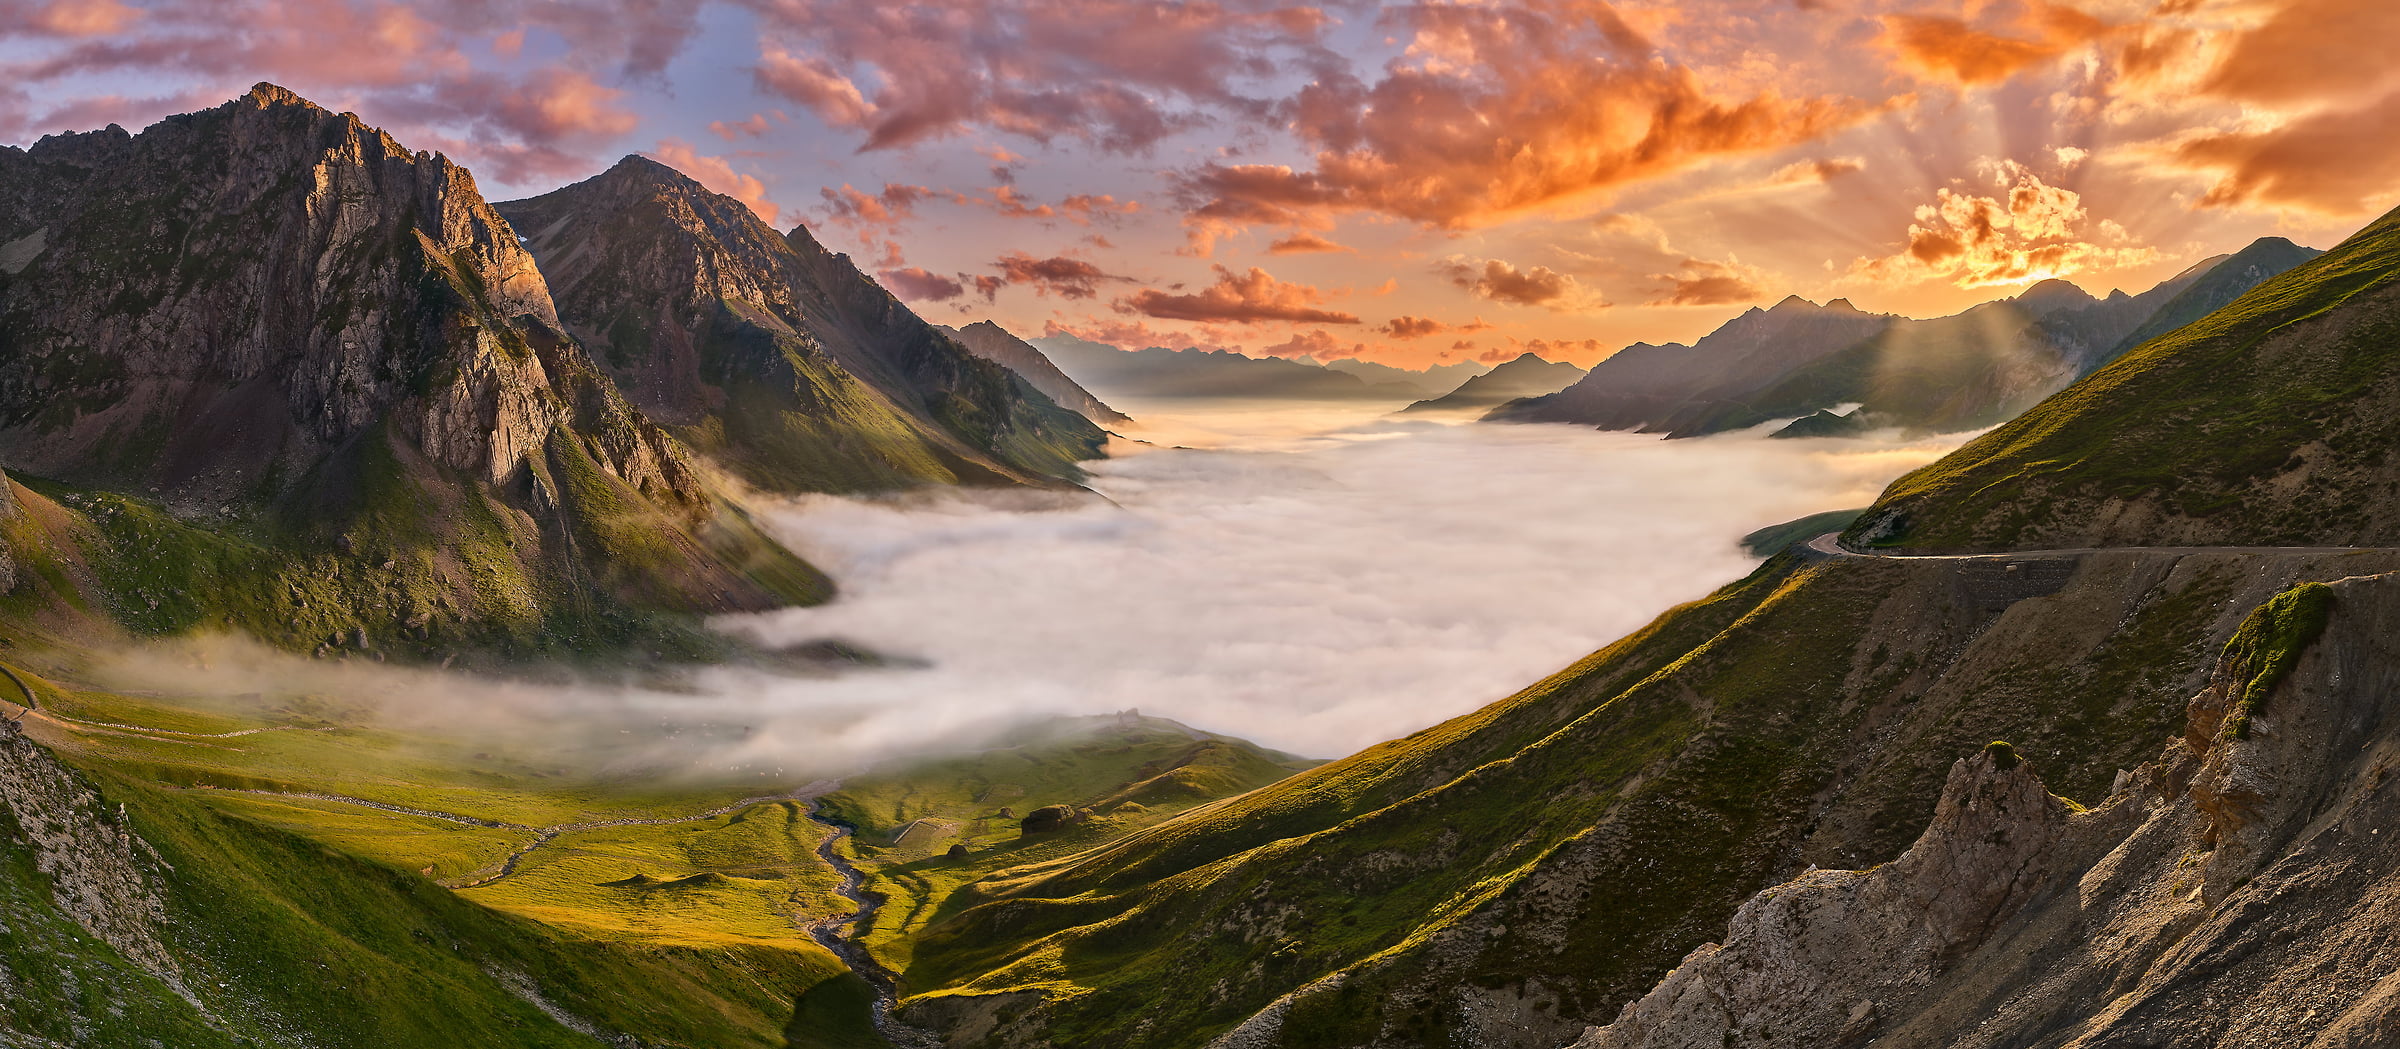 320 megapixels! A very high resolution, large-format VAST photo print of a sunset landscape with a valley, fog, mountains, and beautiful clouds; photograph created by David Meaux in Vallée de Barèges, Hautes-Pyrénées, France